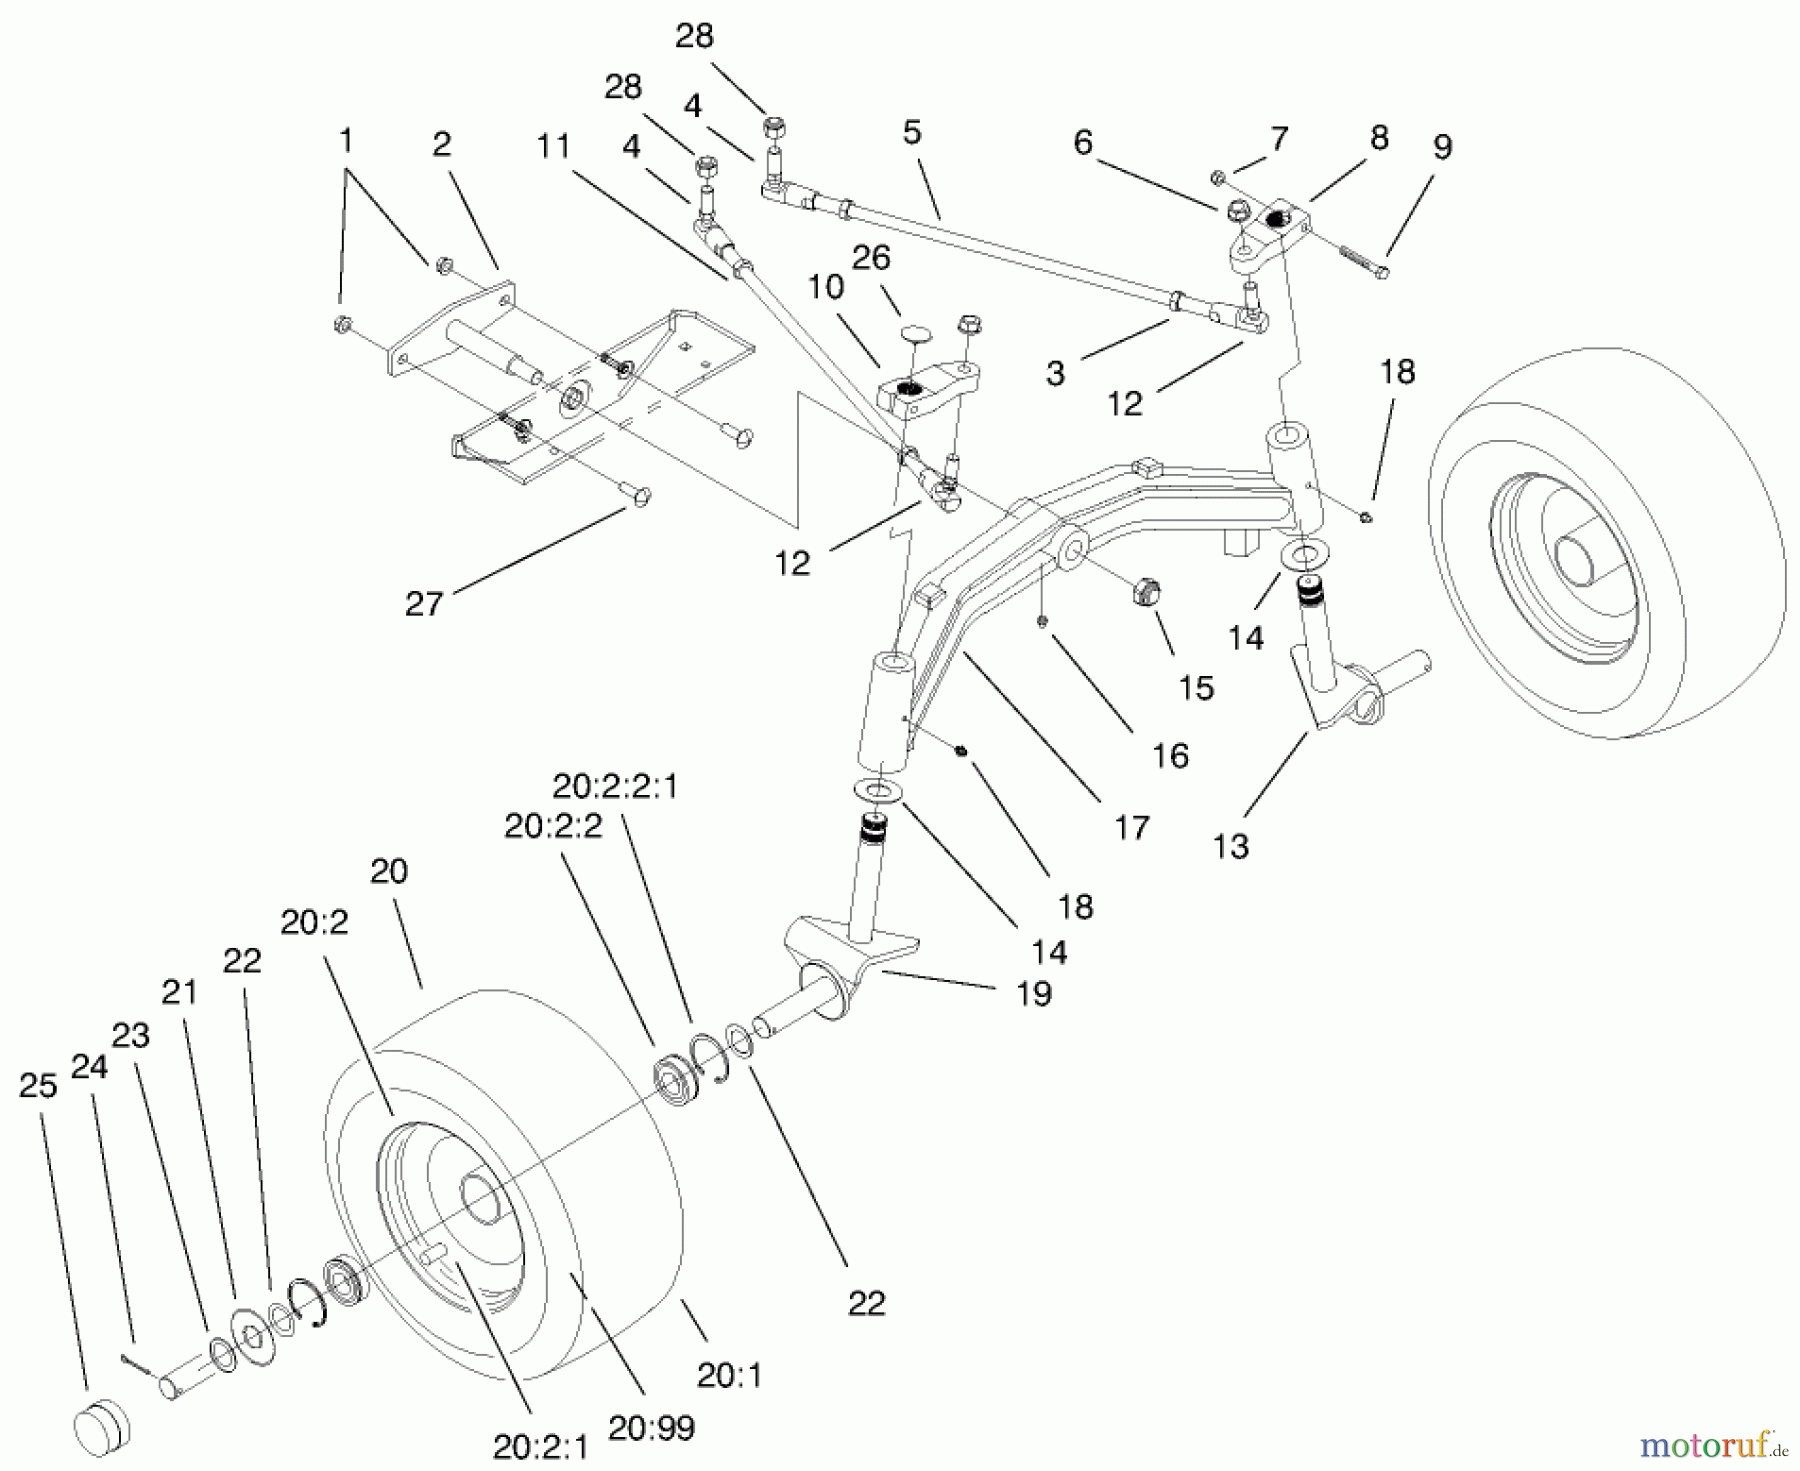  Toro Neu Mowers, Lawn & Garden Tractor Seite 1 73561 (522xi) - Toro 522xi Garden Tractor, 2000 (000000001-000999999) TIE RODS, SPINDLE, & FRONT AXLE ASSEMBLY